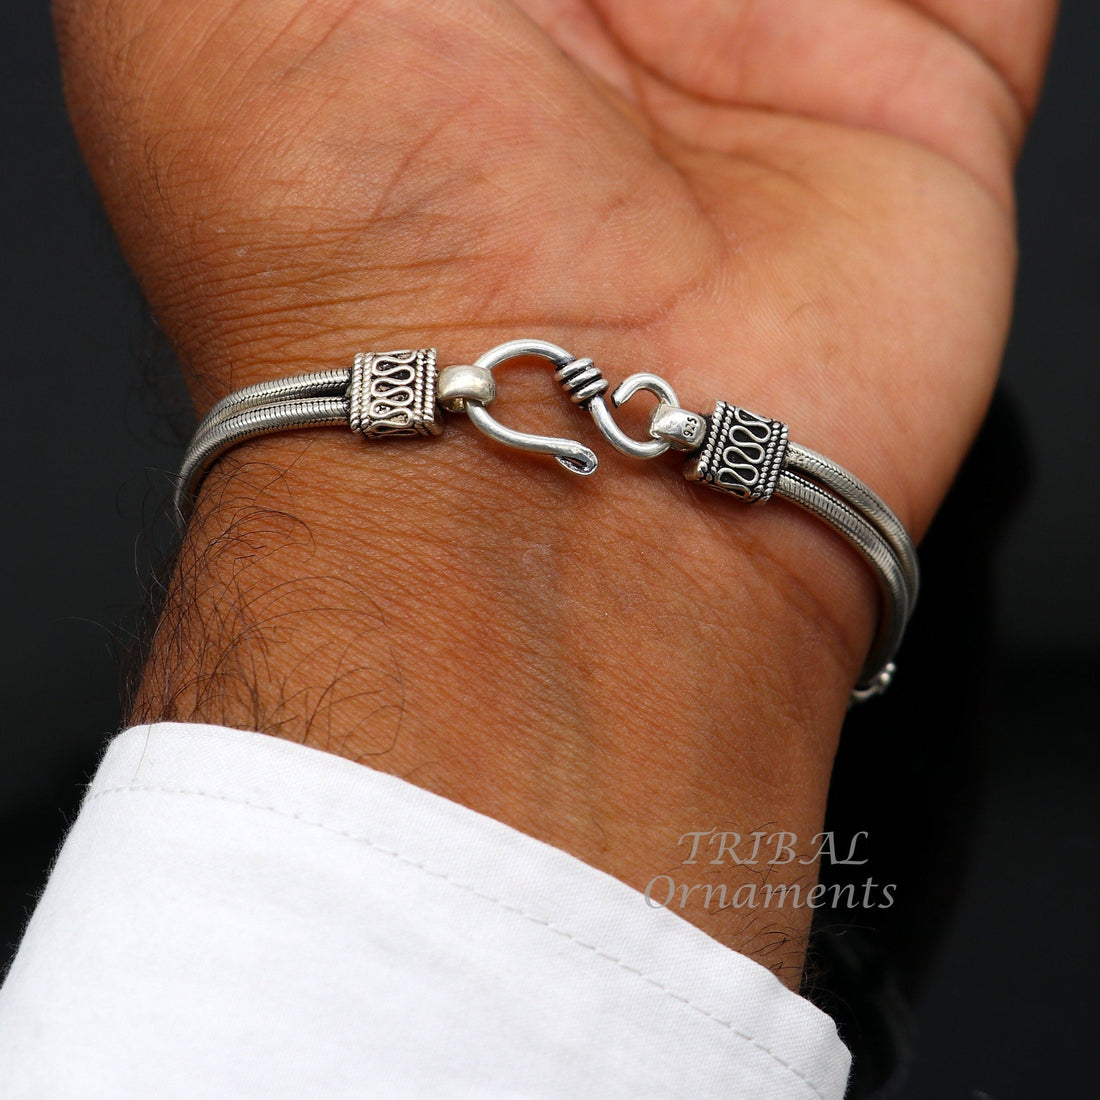 925 Sterling silver handmade customized solid silver 2 line snake chain bracelet oxidized personalized gifting jewelry for girls boys sbr411 - TRIBAL ORNAMENTS